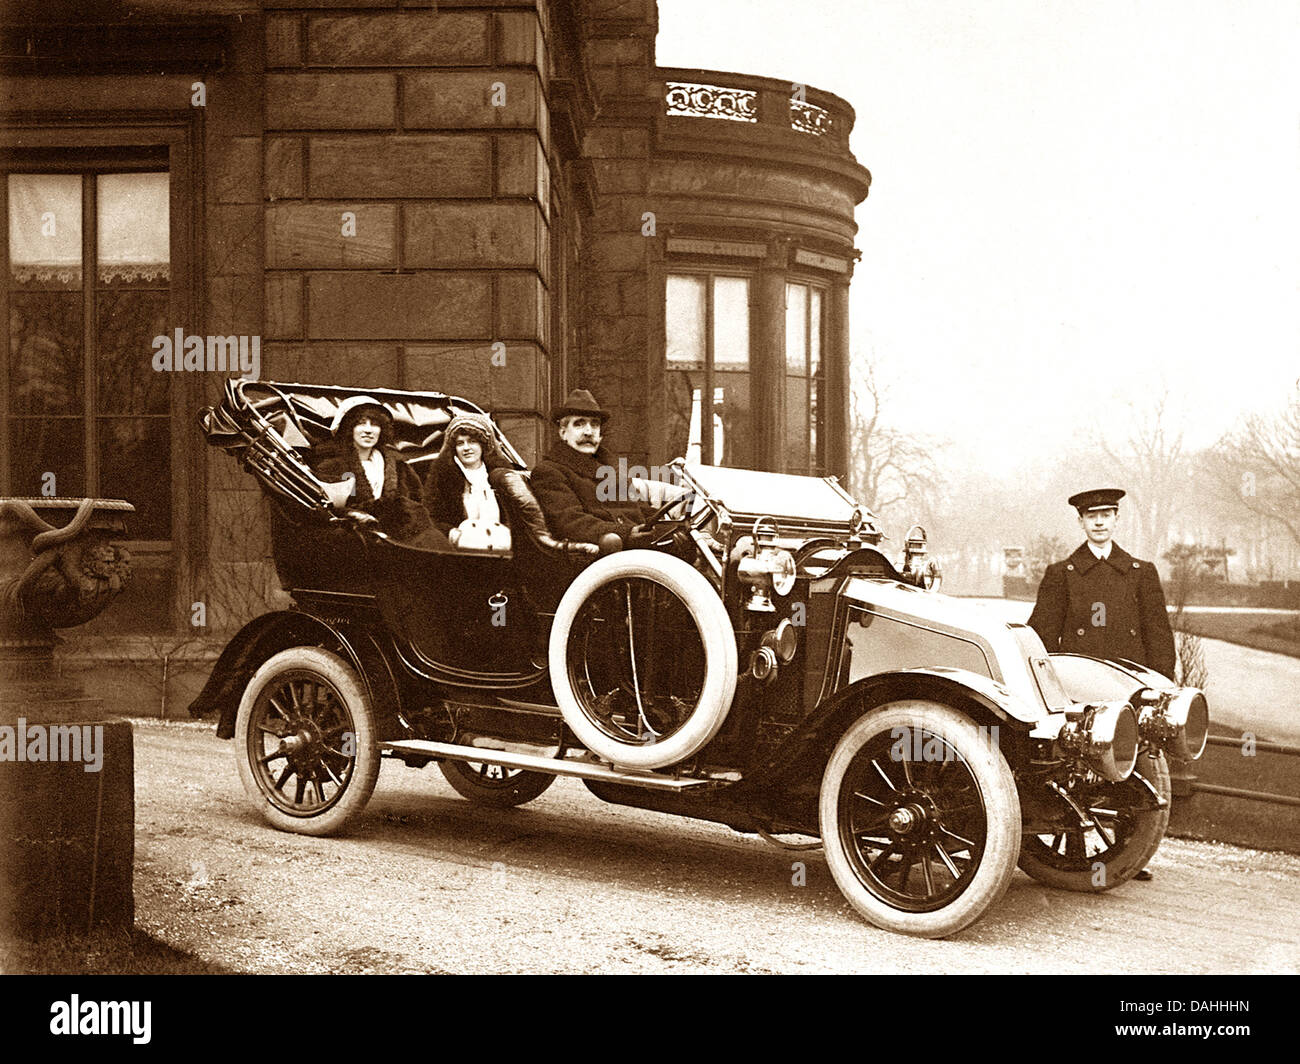 Renault motor car with Chauffeur early 1900s Stock Photo